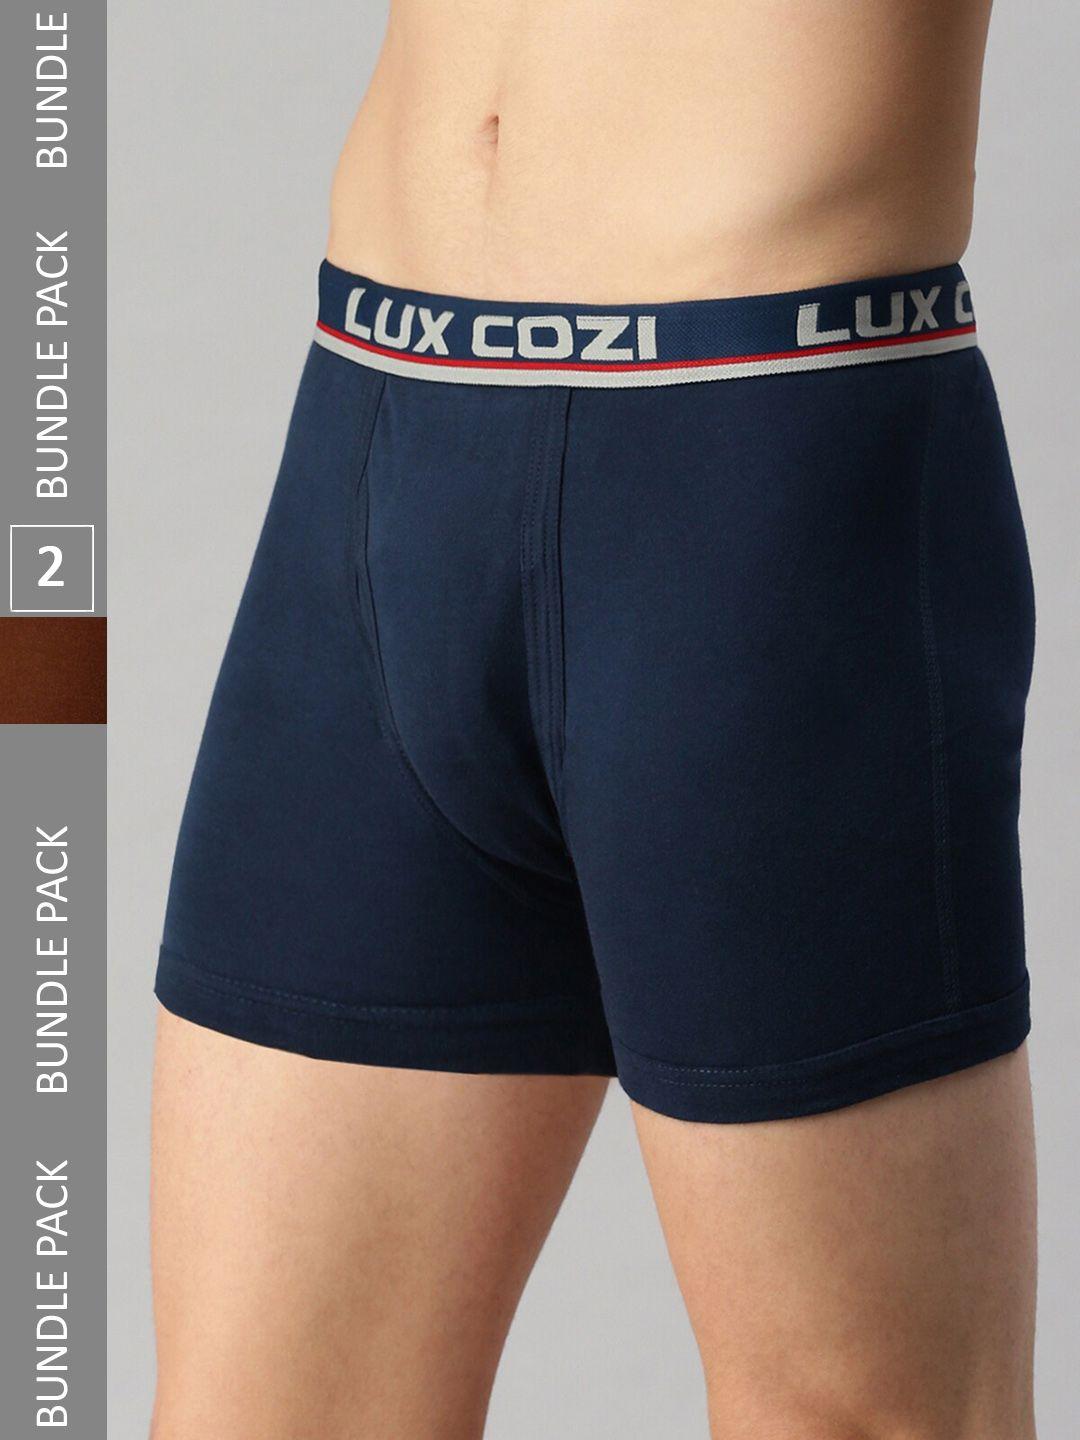 lux cozi men pack of 2 pure cotton breathable trunks cozi_intlock_mbu_mst_2pc